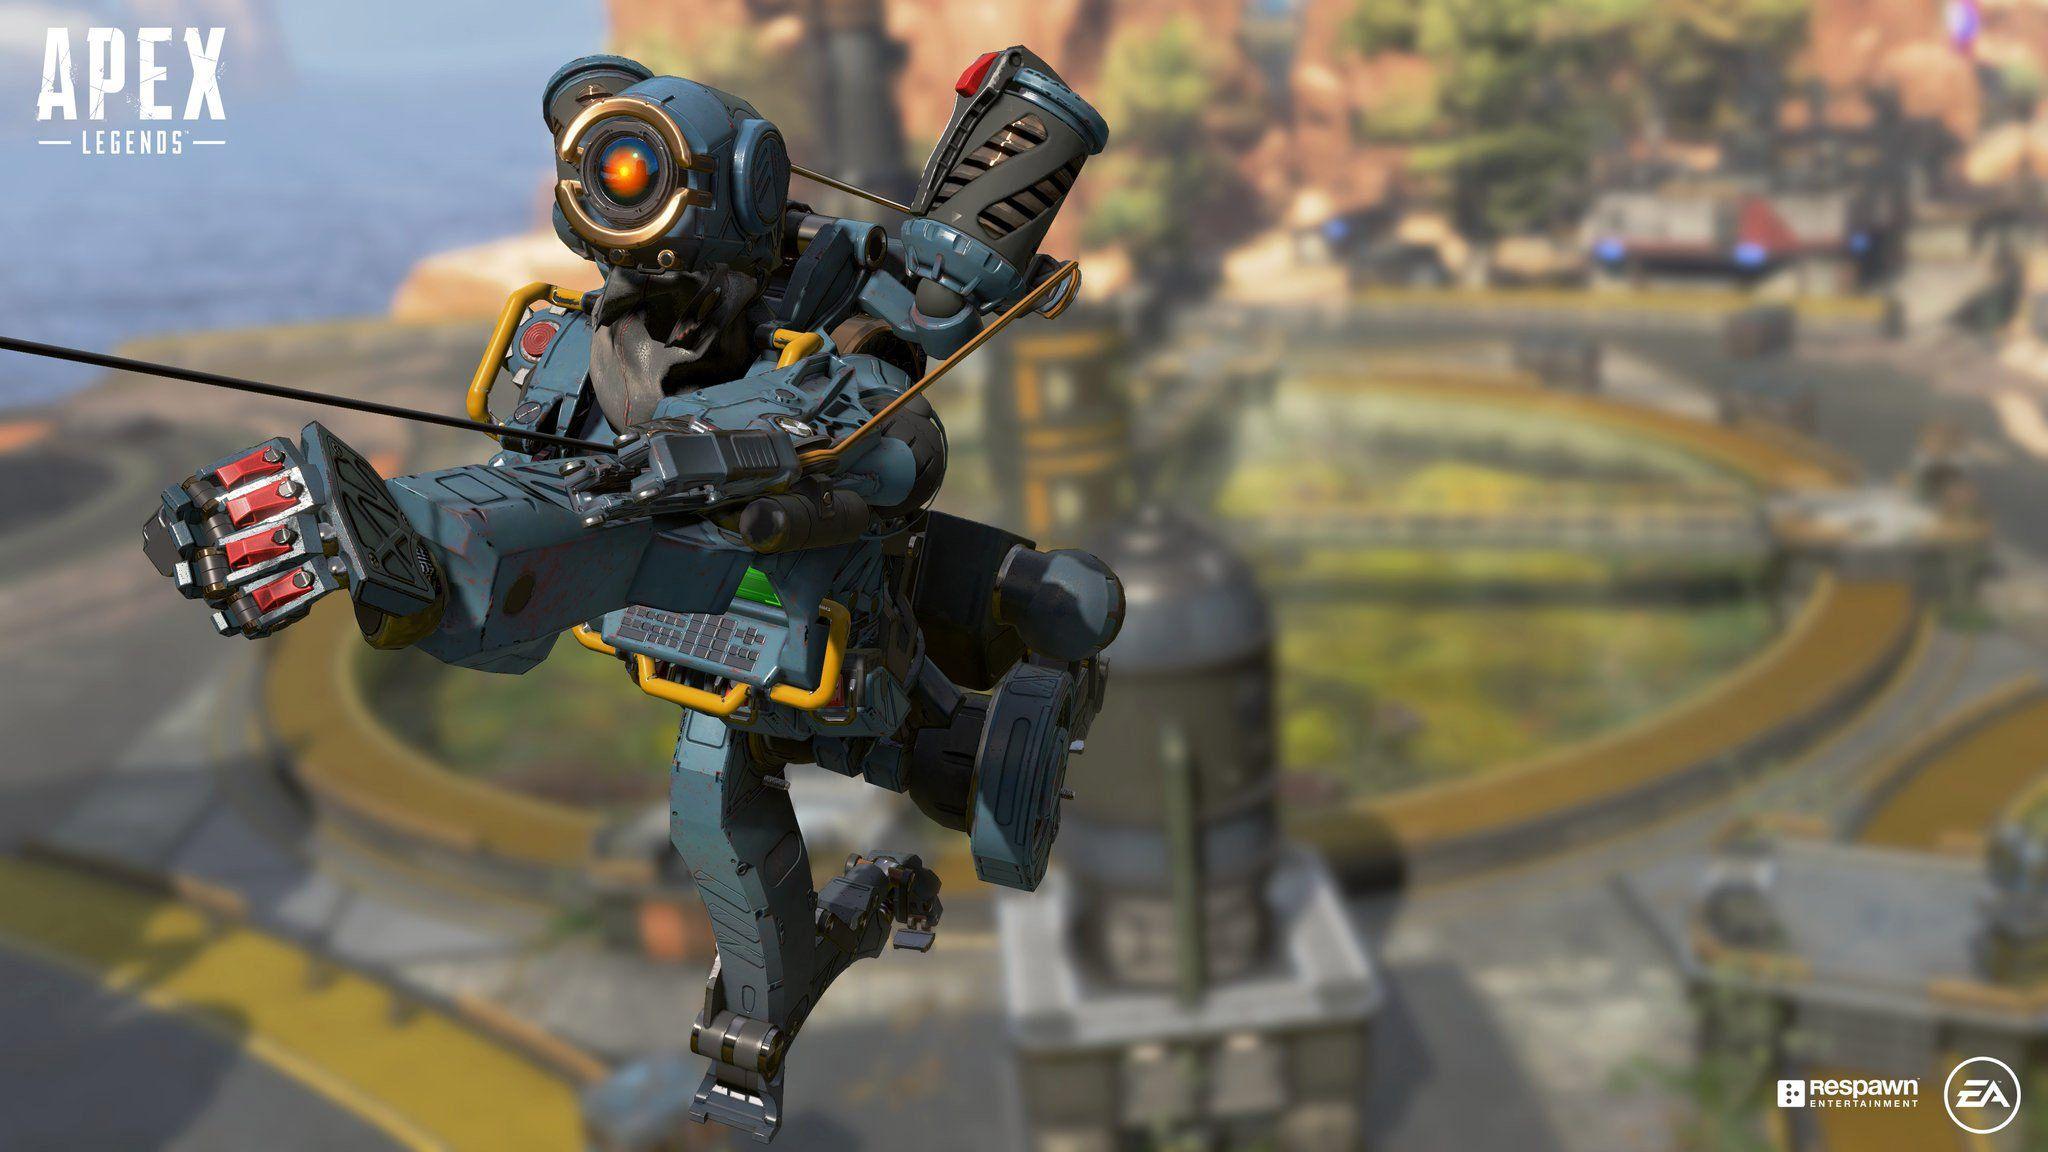 Is Apex Legends available on console?